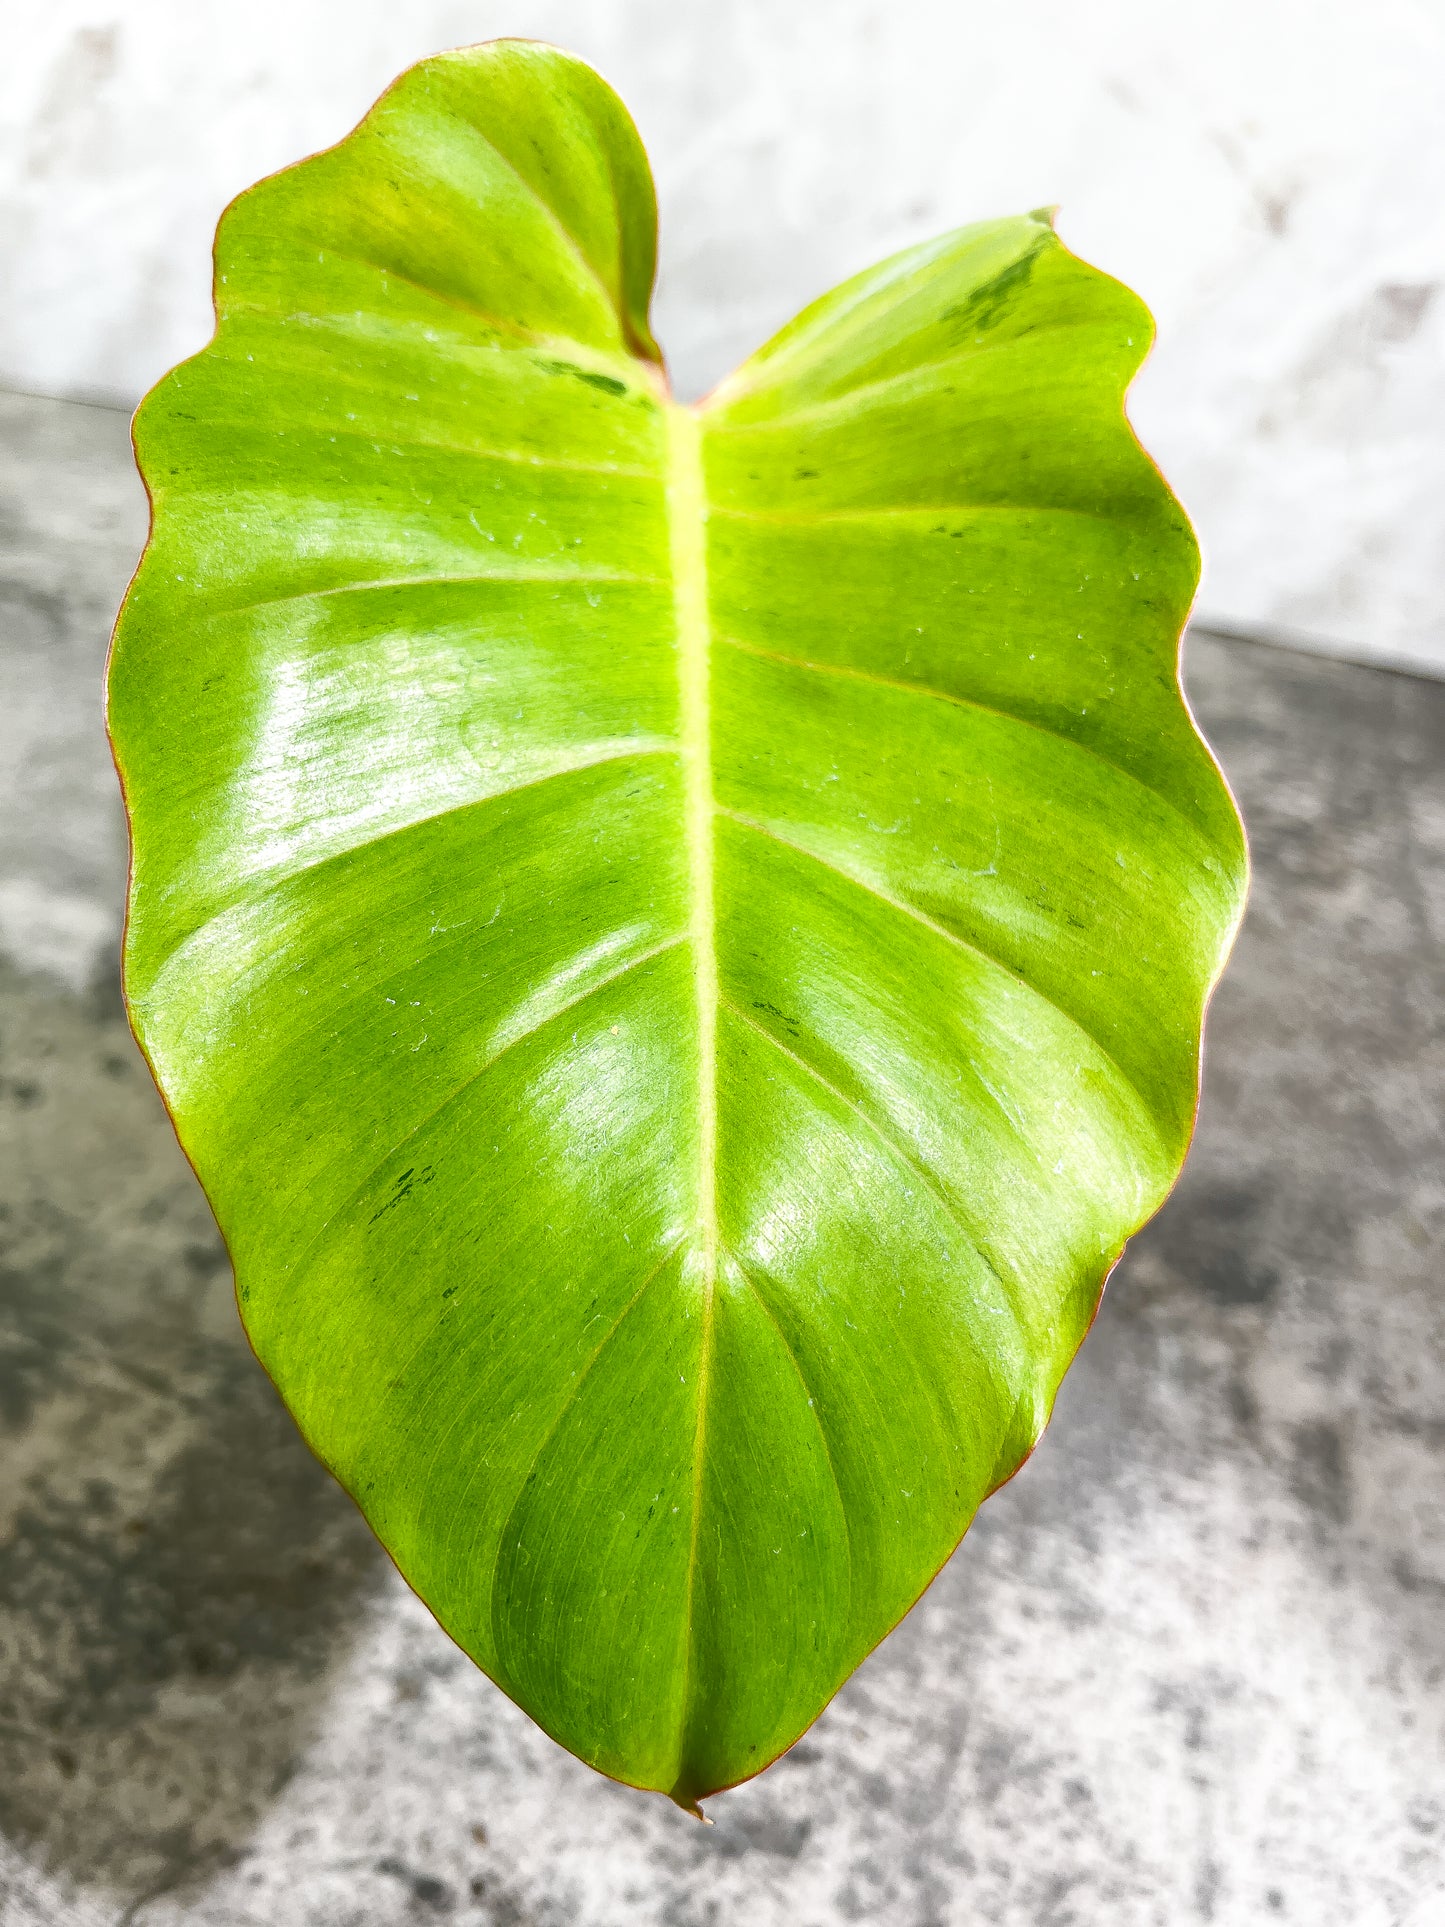 Philodendron Snowdrifts Slightly Rooted 1 leaf 1 growing bud